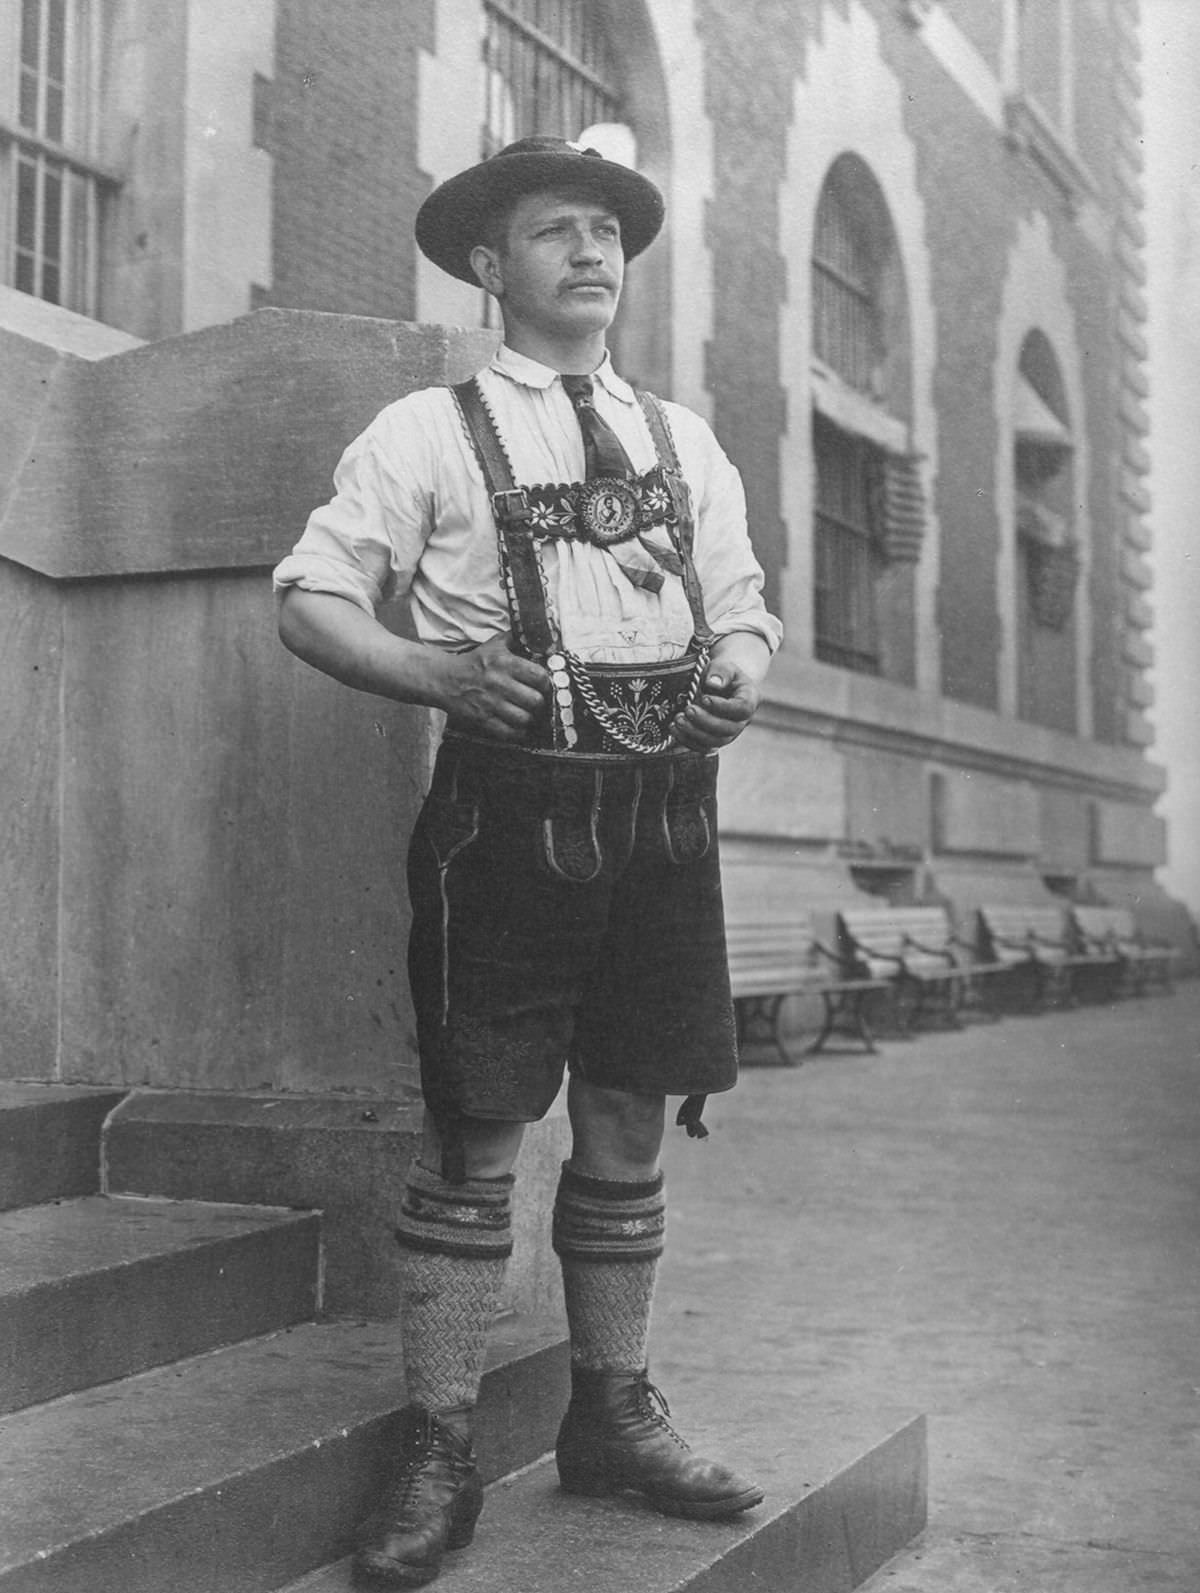 A man from Bavaria in 1910.